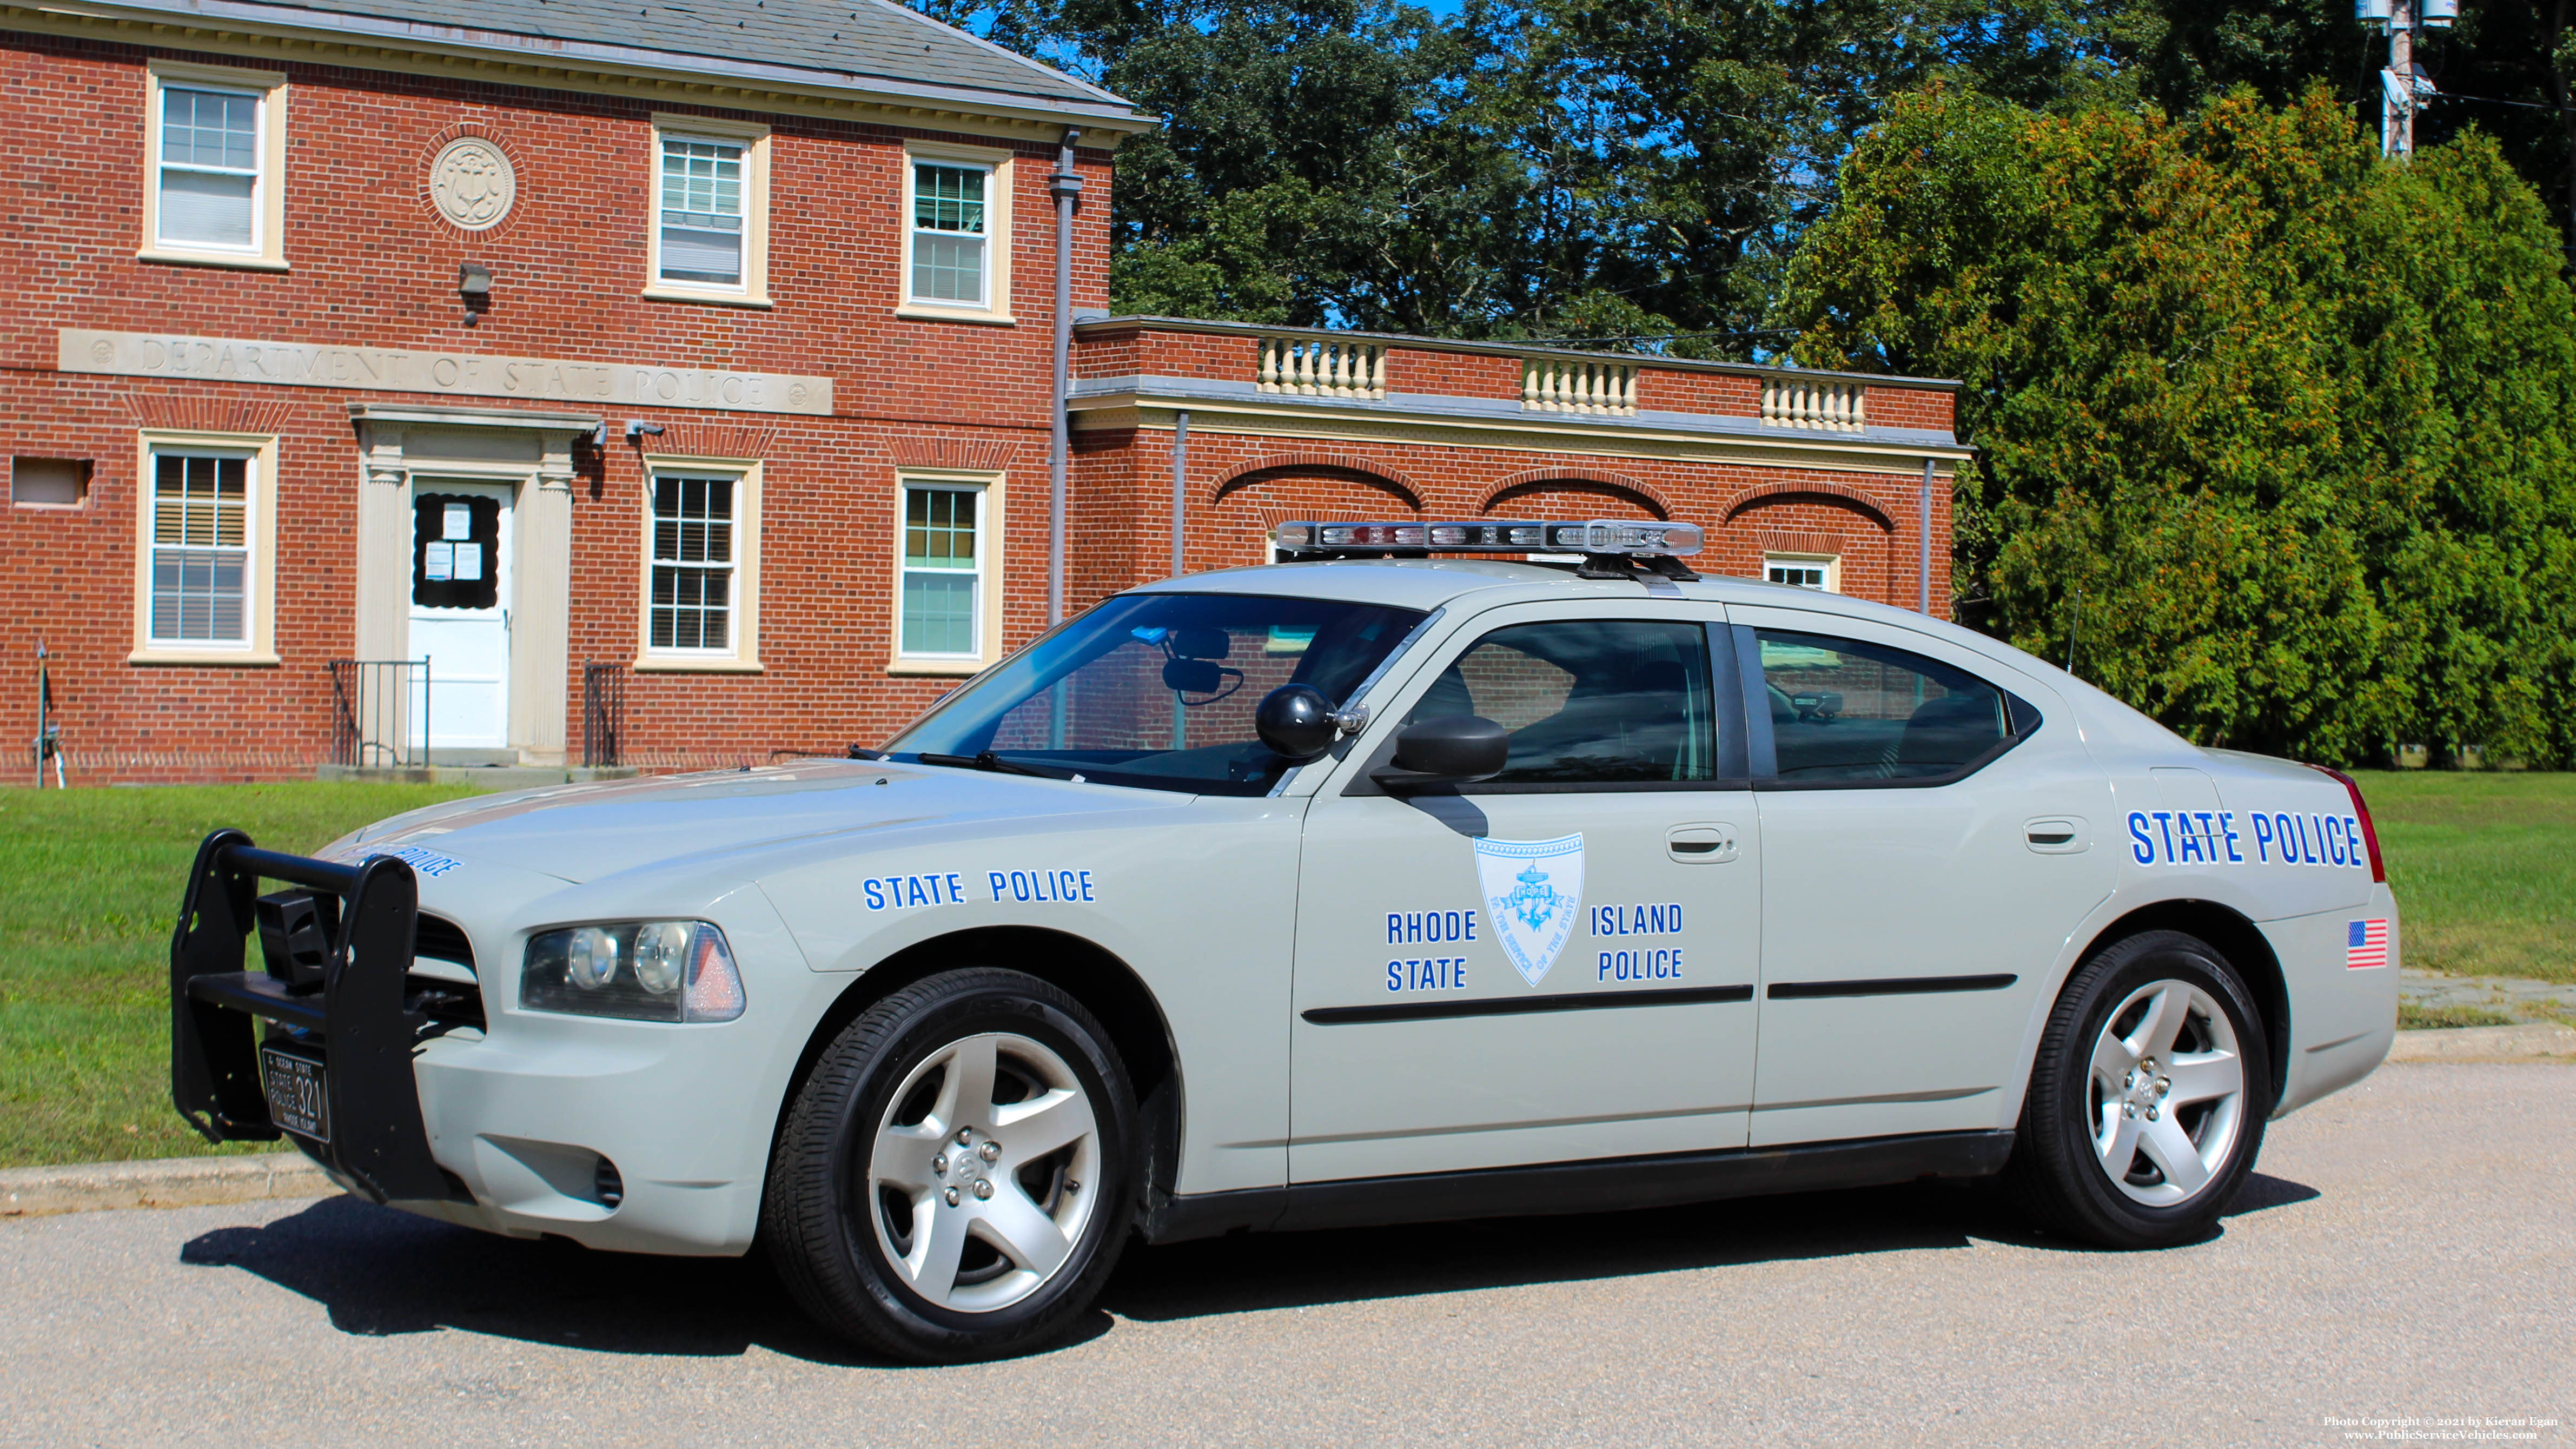 A photo  of Rhode Island State Police
            Cruiser 321, a 2006-2010 Dodge Charger             taken by Kieran Egan